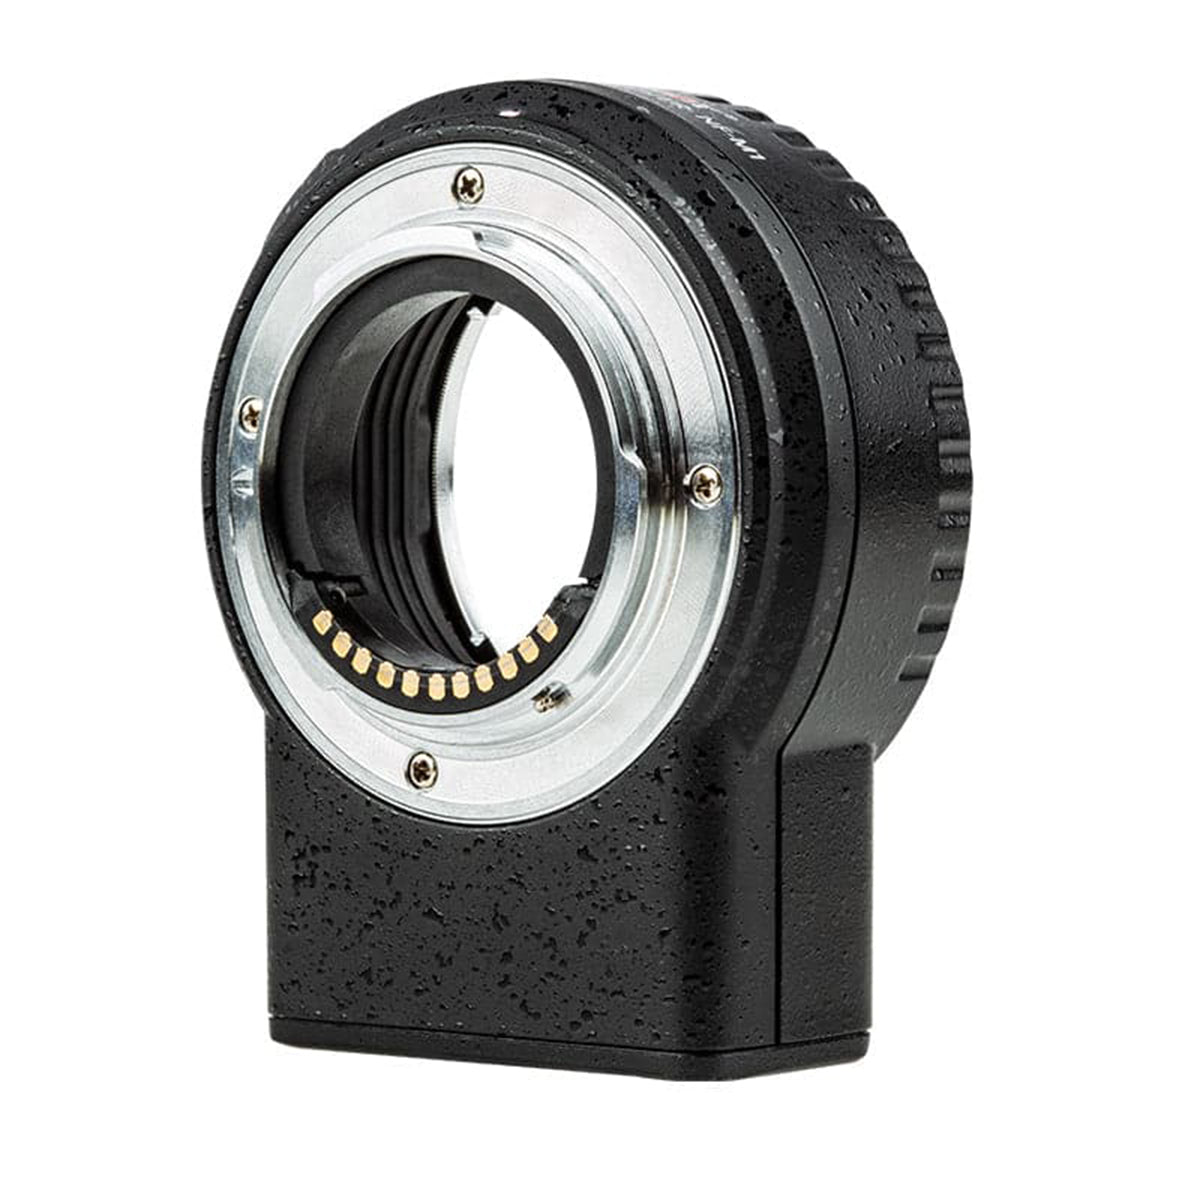 Viltrox AF Adapter for Nikon F Lenses to M4/3 Olympus and Panasonic VL-NF-M1